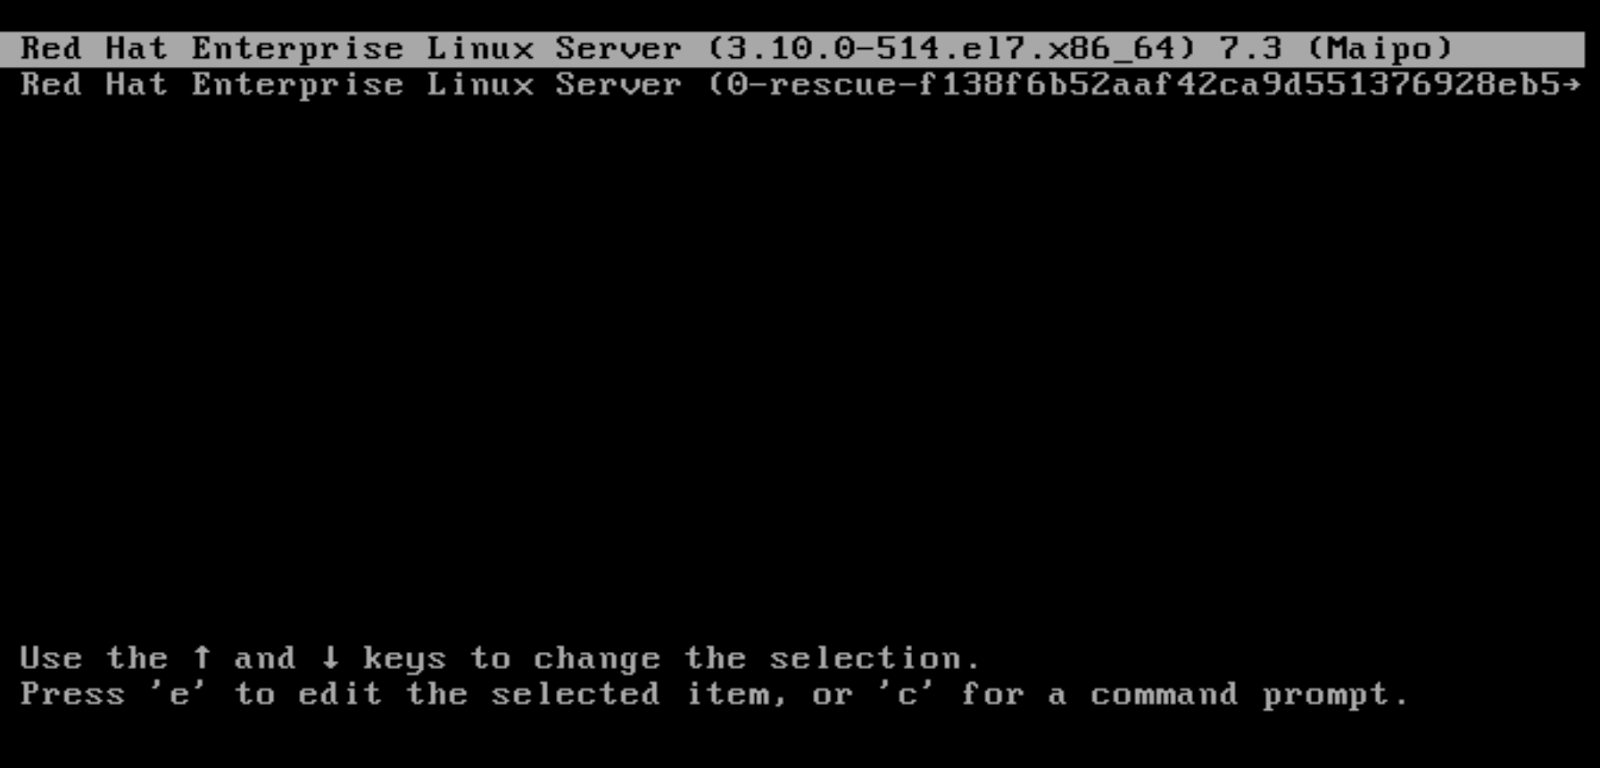 Changing/ Recovering root user password in RHEL7/ Cent OS 7